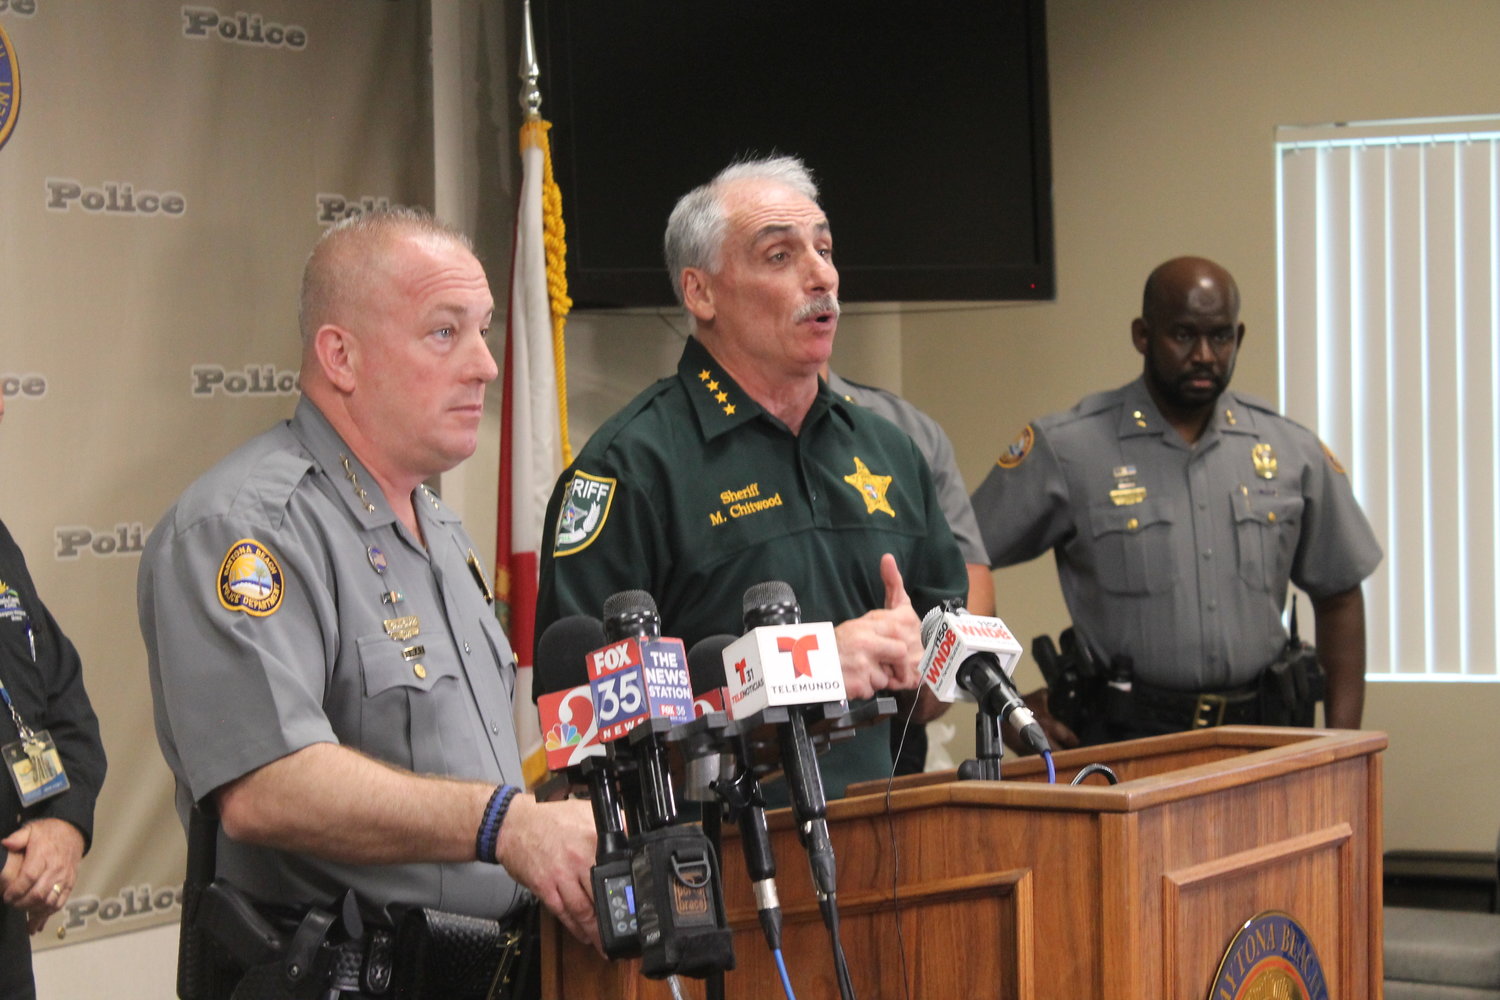 Chief Craig Capri and Sheriff Mike Chitwood addressing the media together